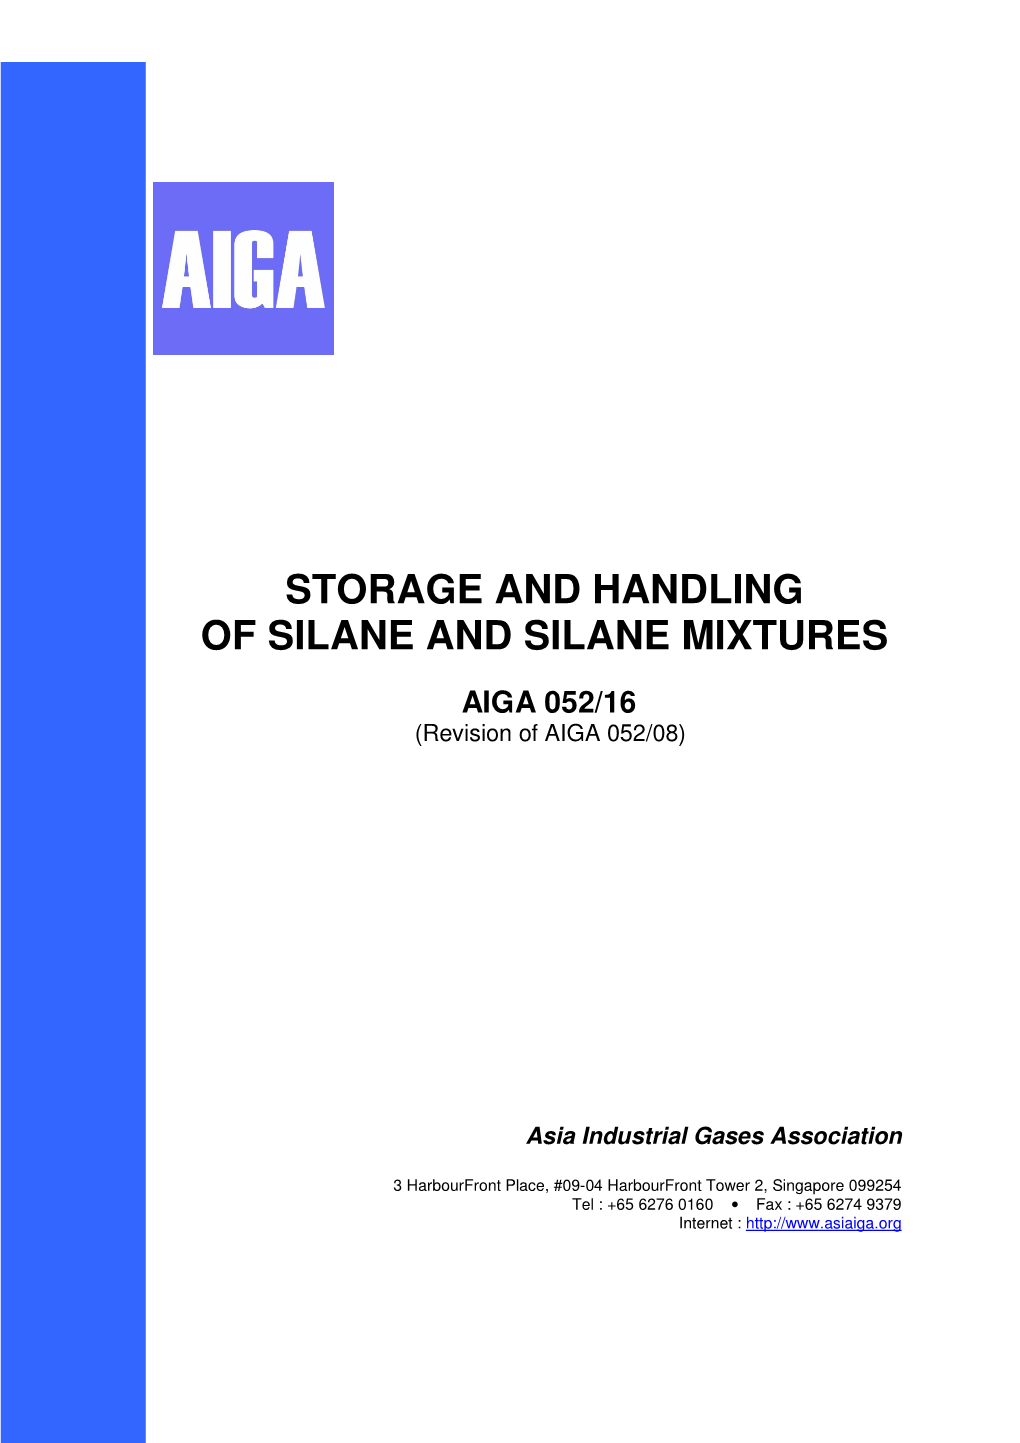 Storage and Handling of Silane and Silane Mixtures